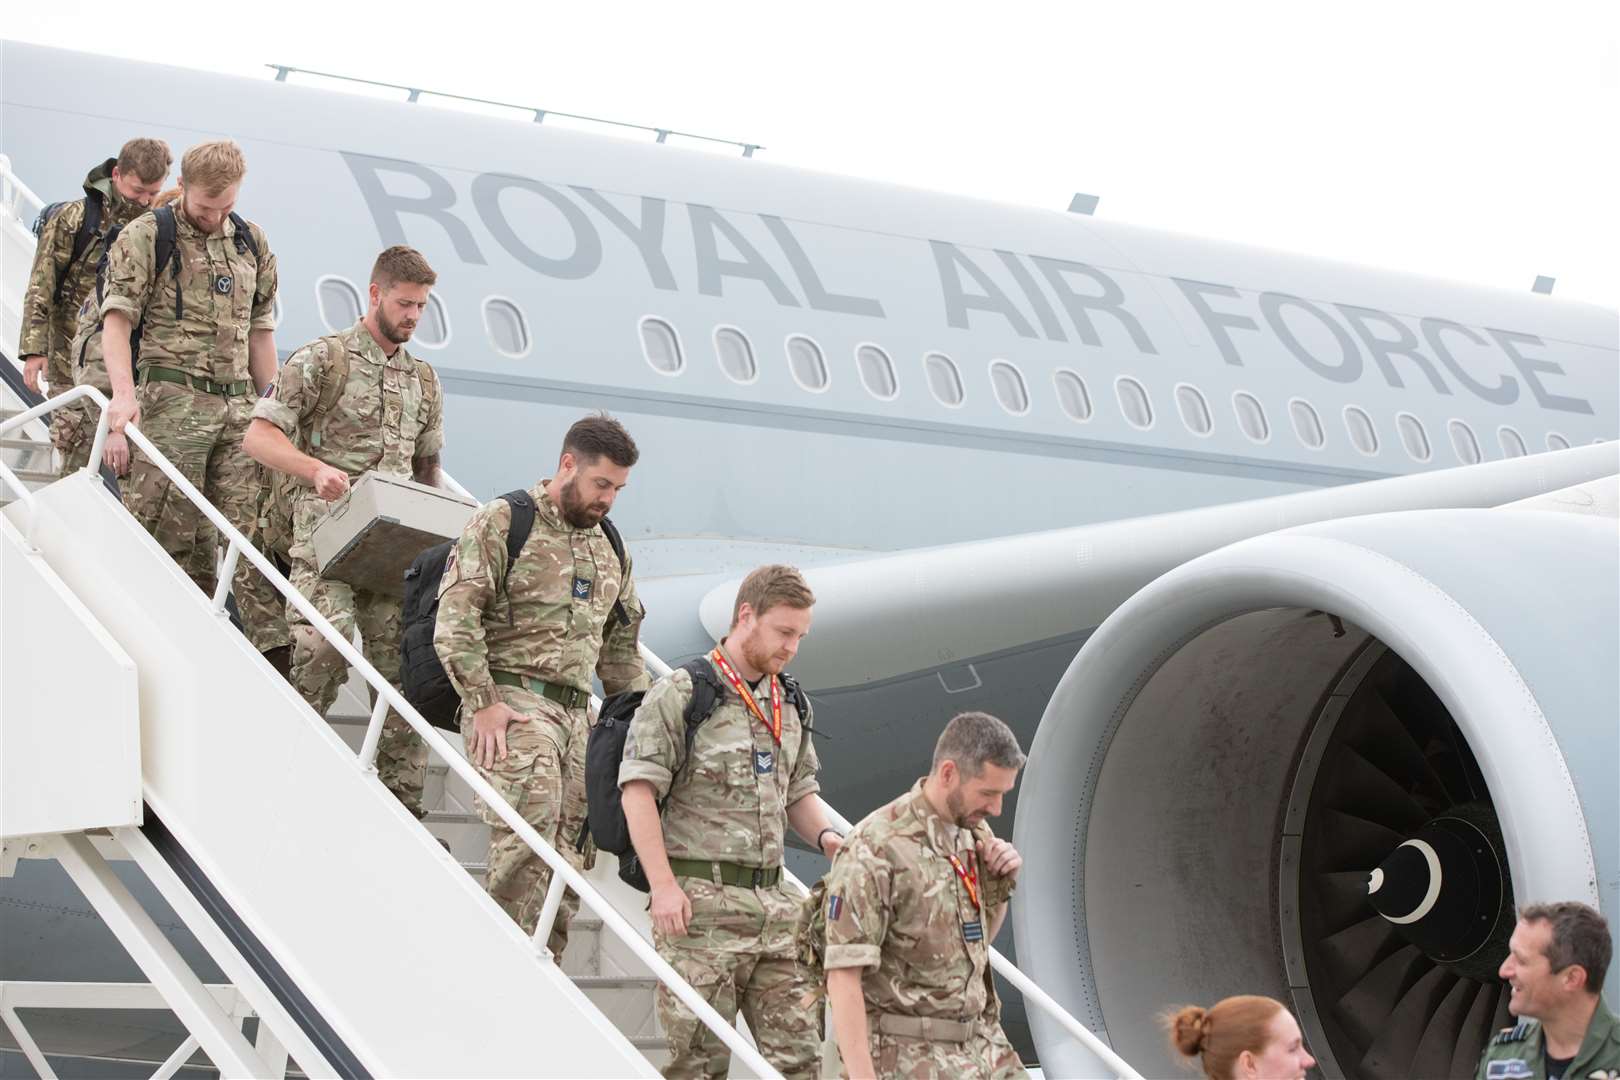 Personnel leave the Voyager aircraft at RAF Lossiemouth having returned to Scotland after a four-month air policing deployment in Estonia...Picture: Daniel Forsyth..